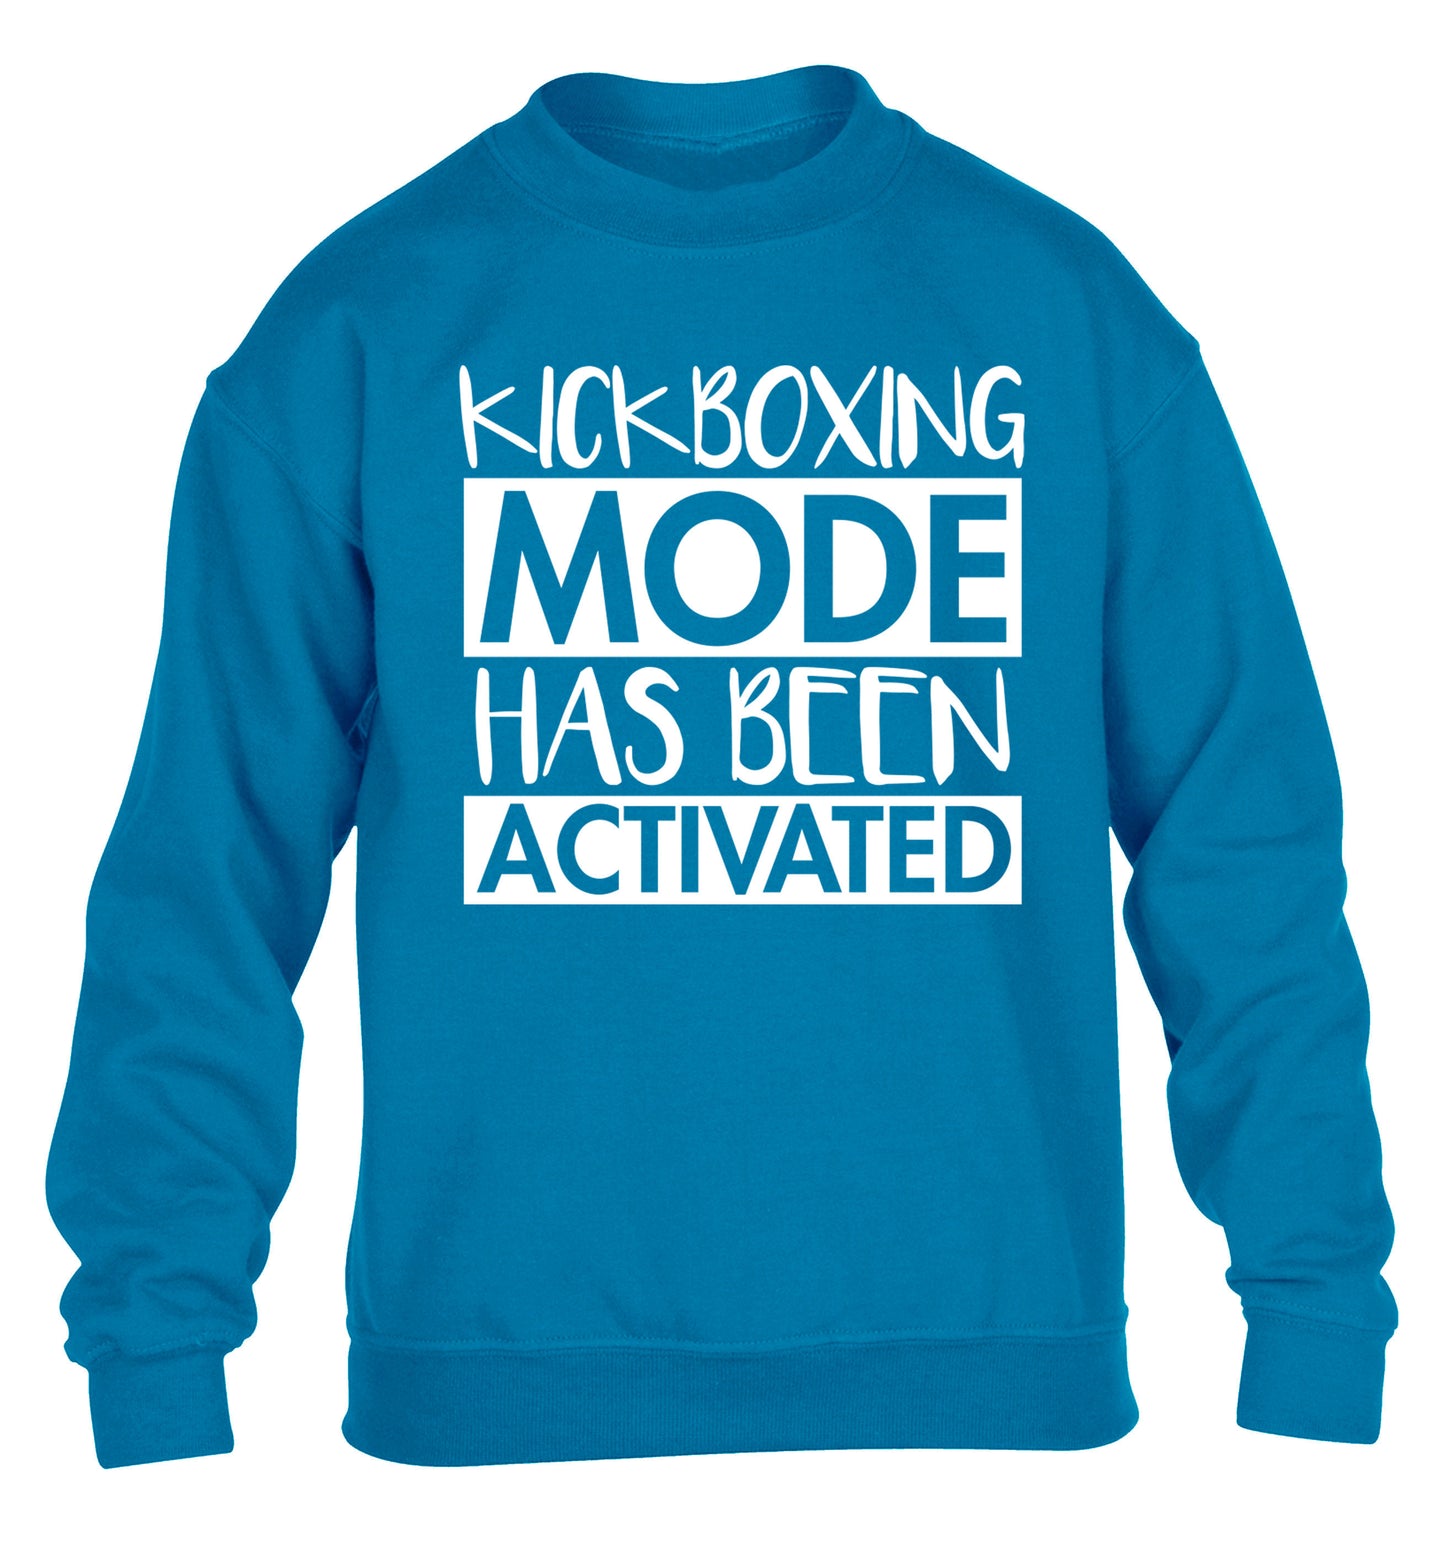 Kickboxing mode activated children's blue sweater 12-14 Years